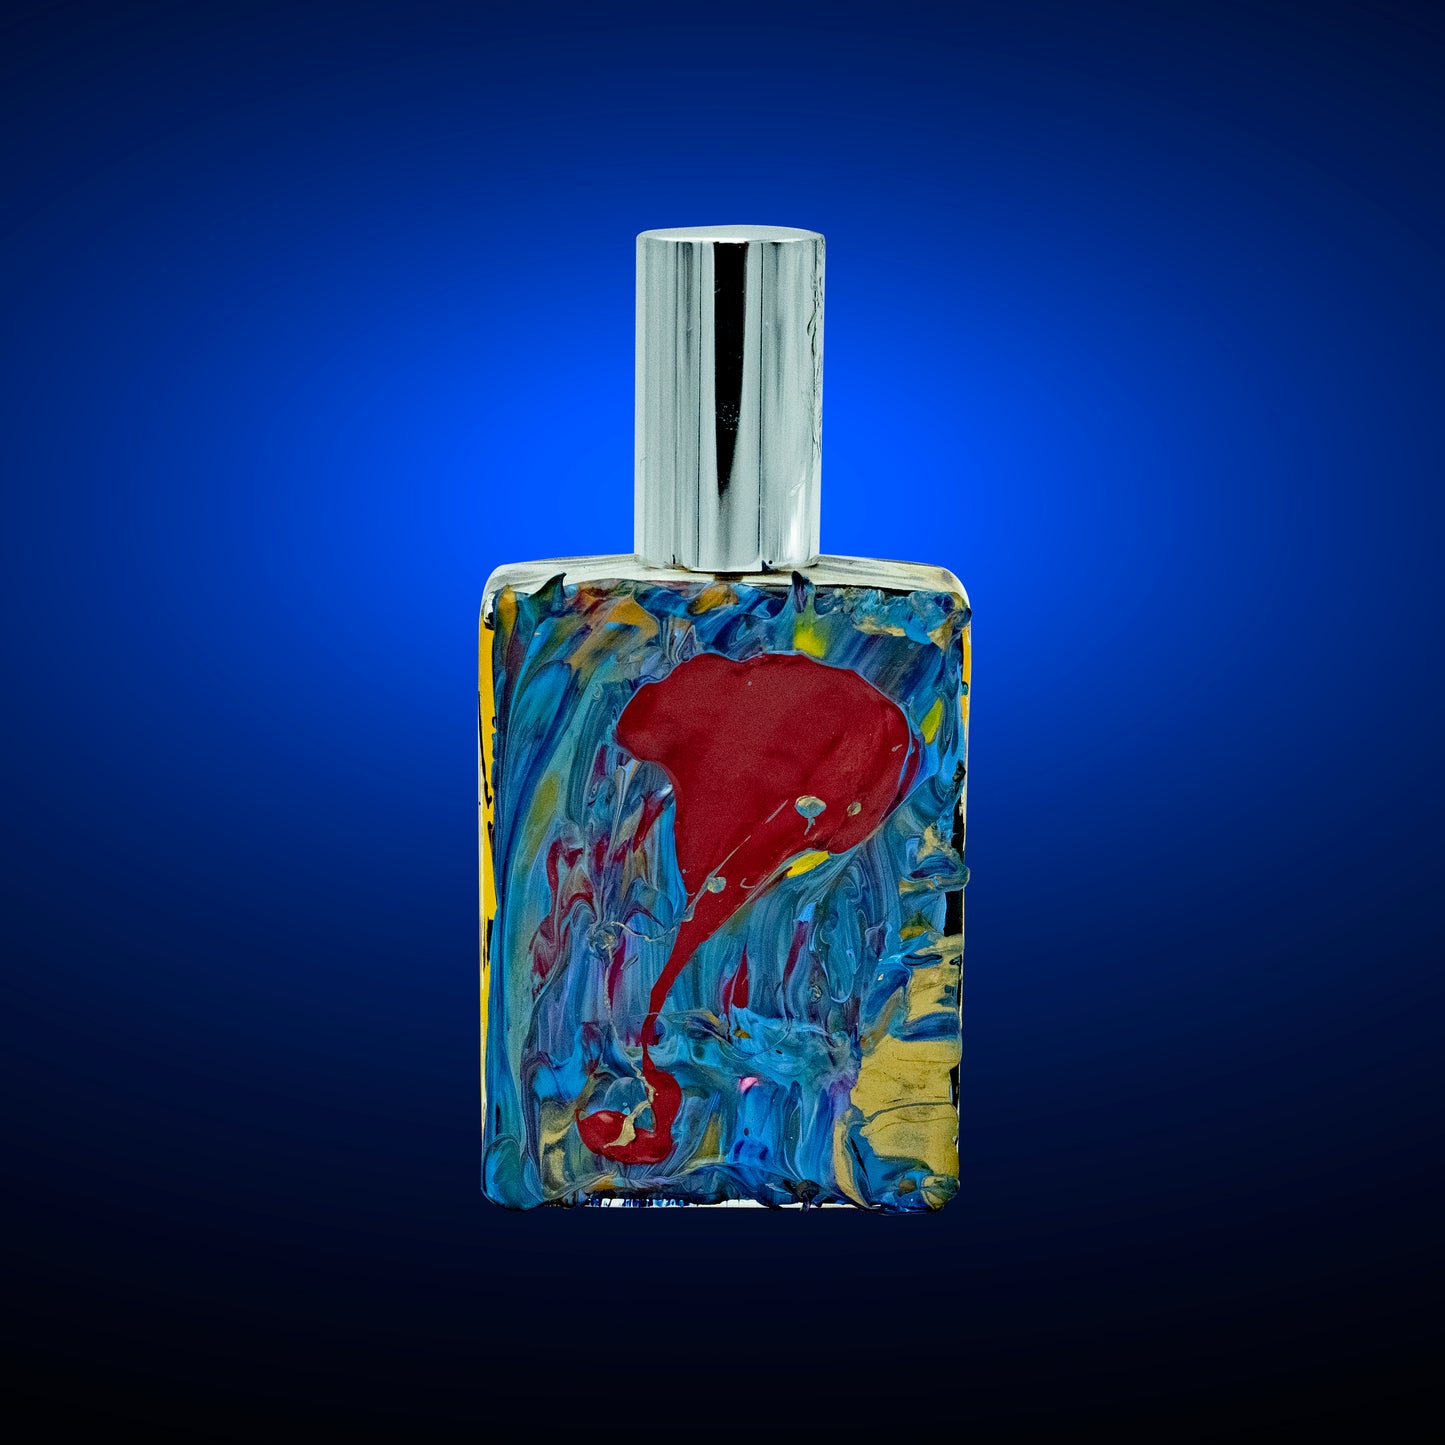 Success Cologne by Niam Jain in hand painted Gold, Blue & Red Bottle